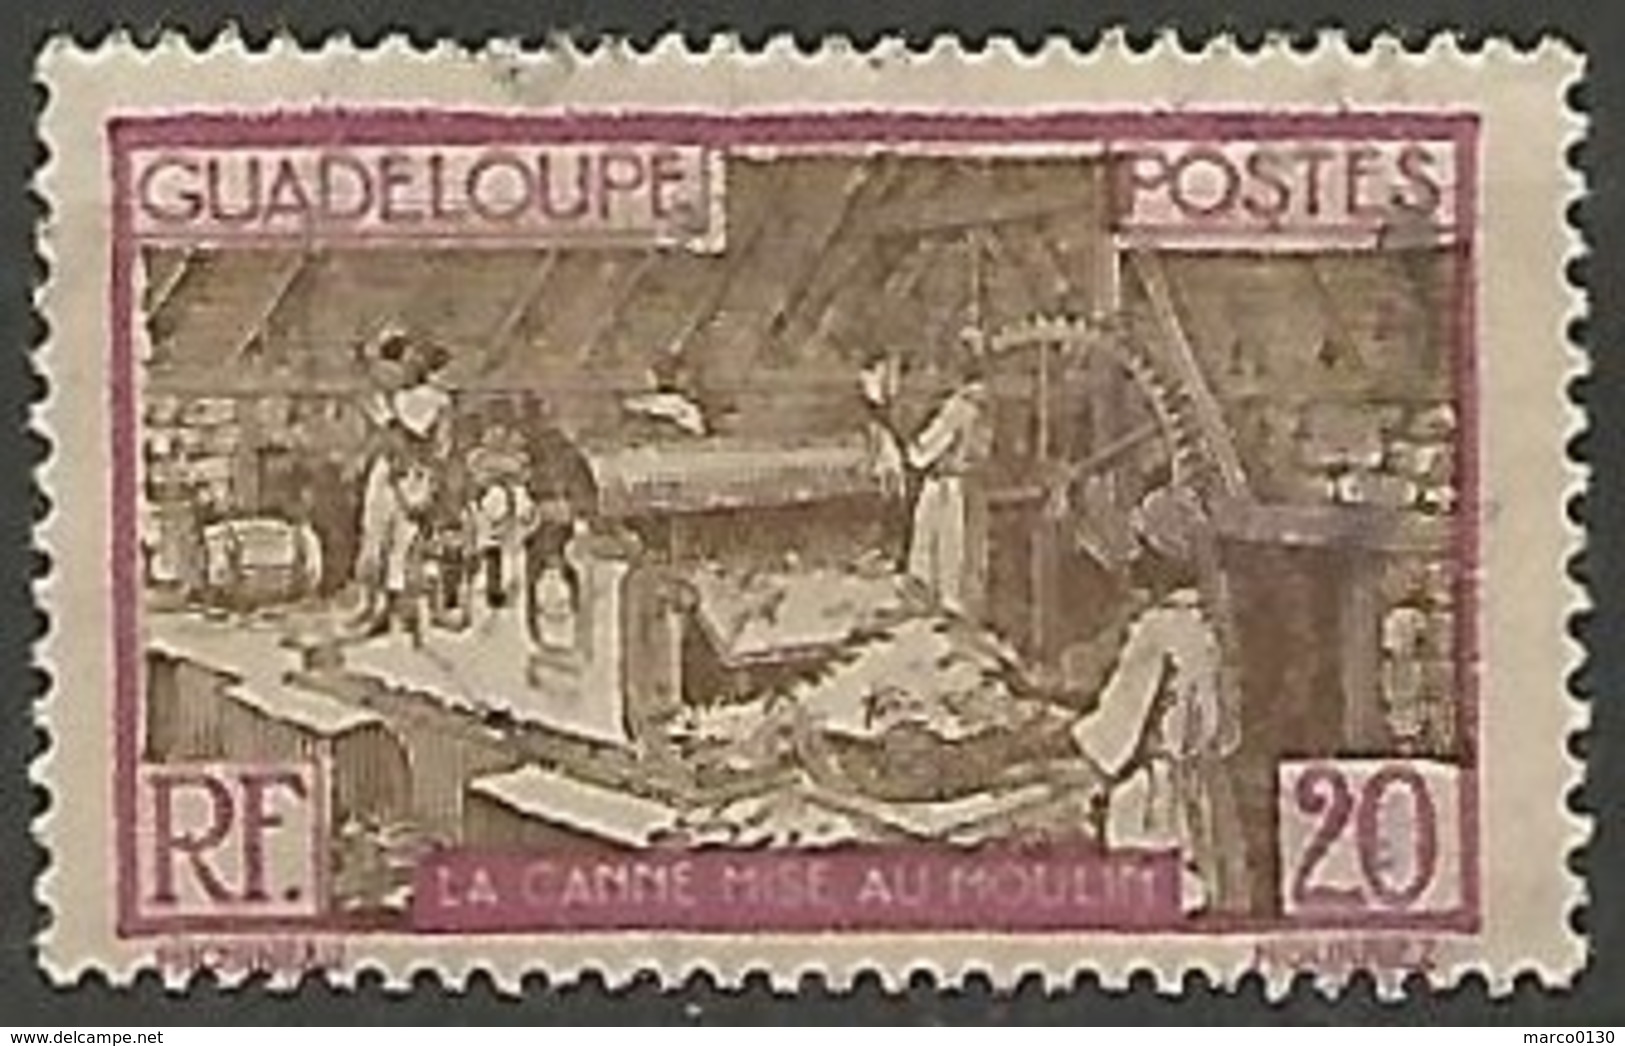 GUADELOUPE N° 105 OBLITERE - Used Stamps